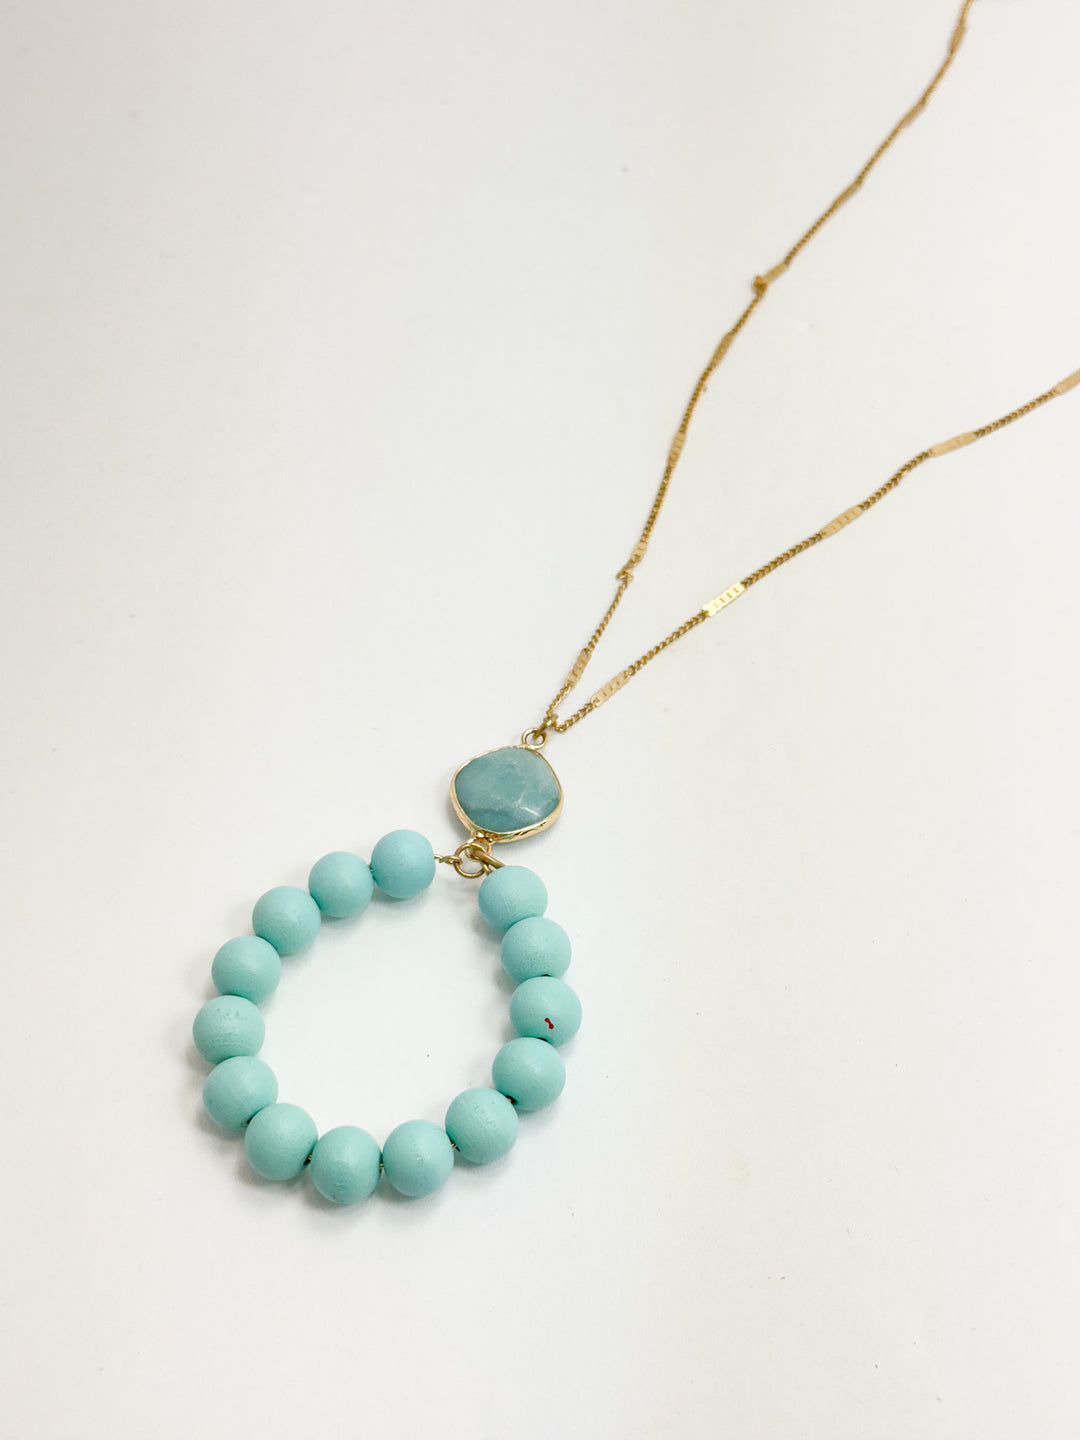 Long Gold Necklace w/ Turquoise Circle Pendant